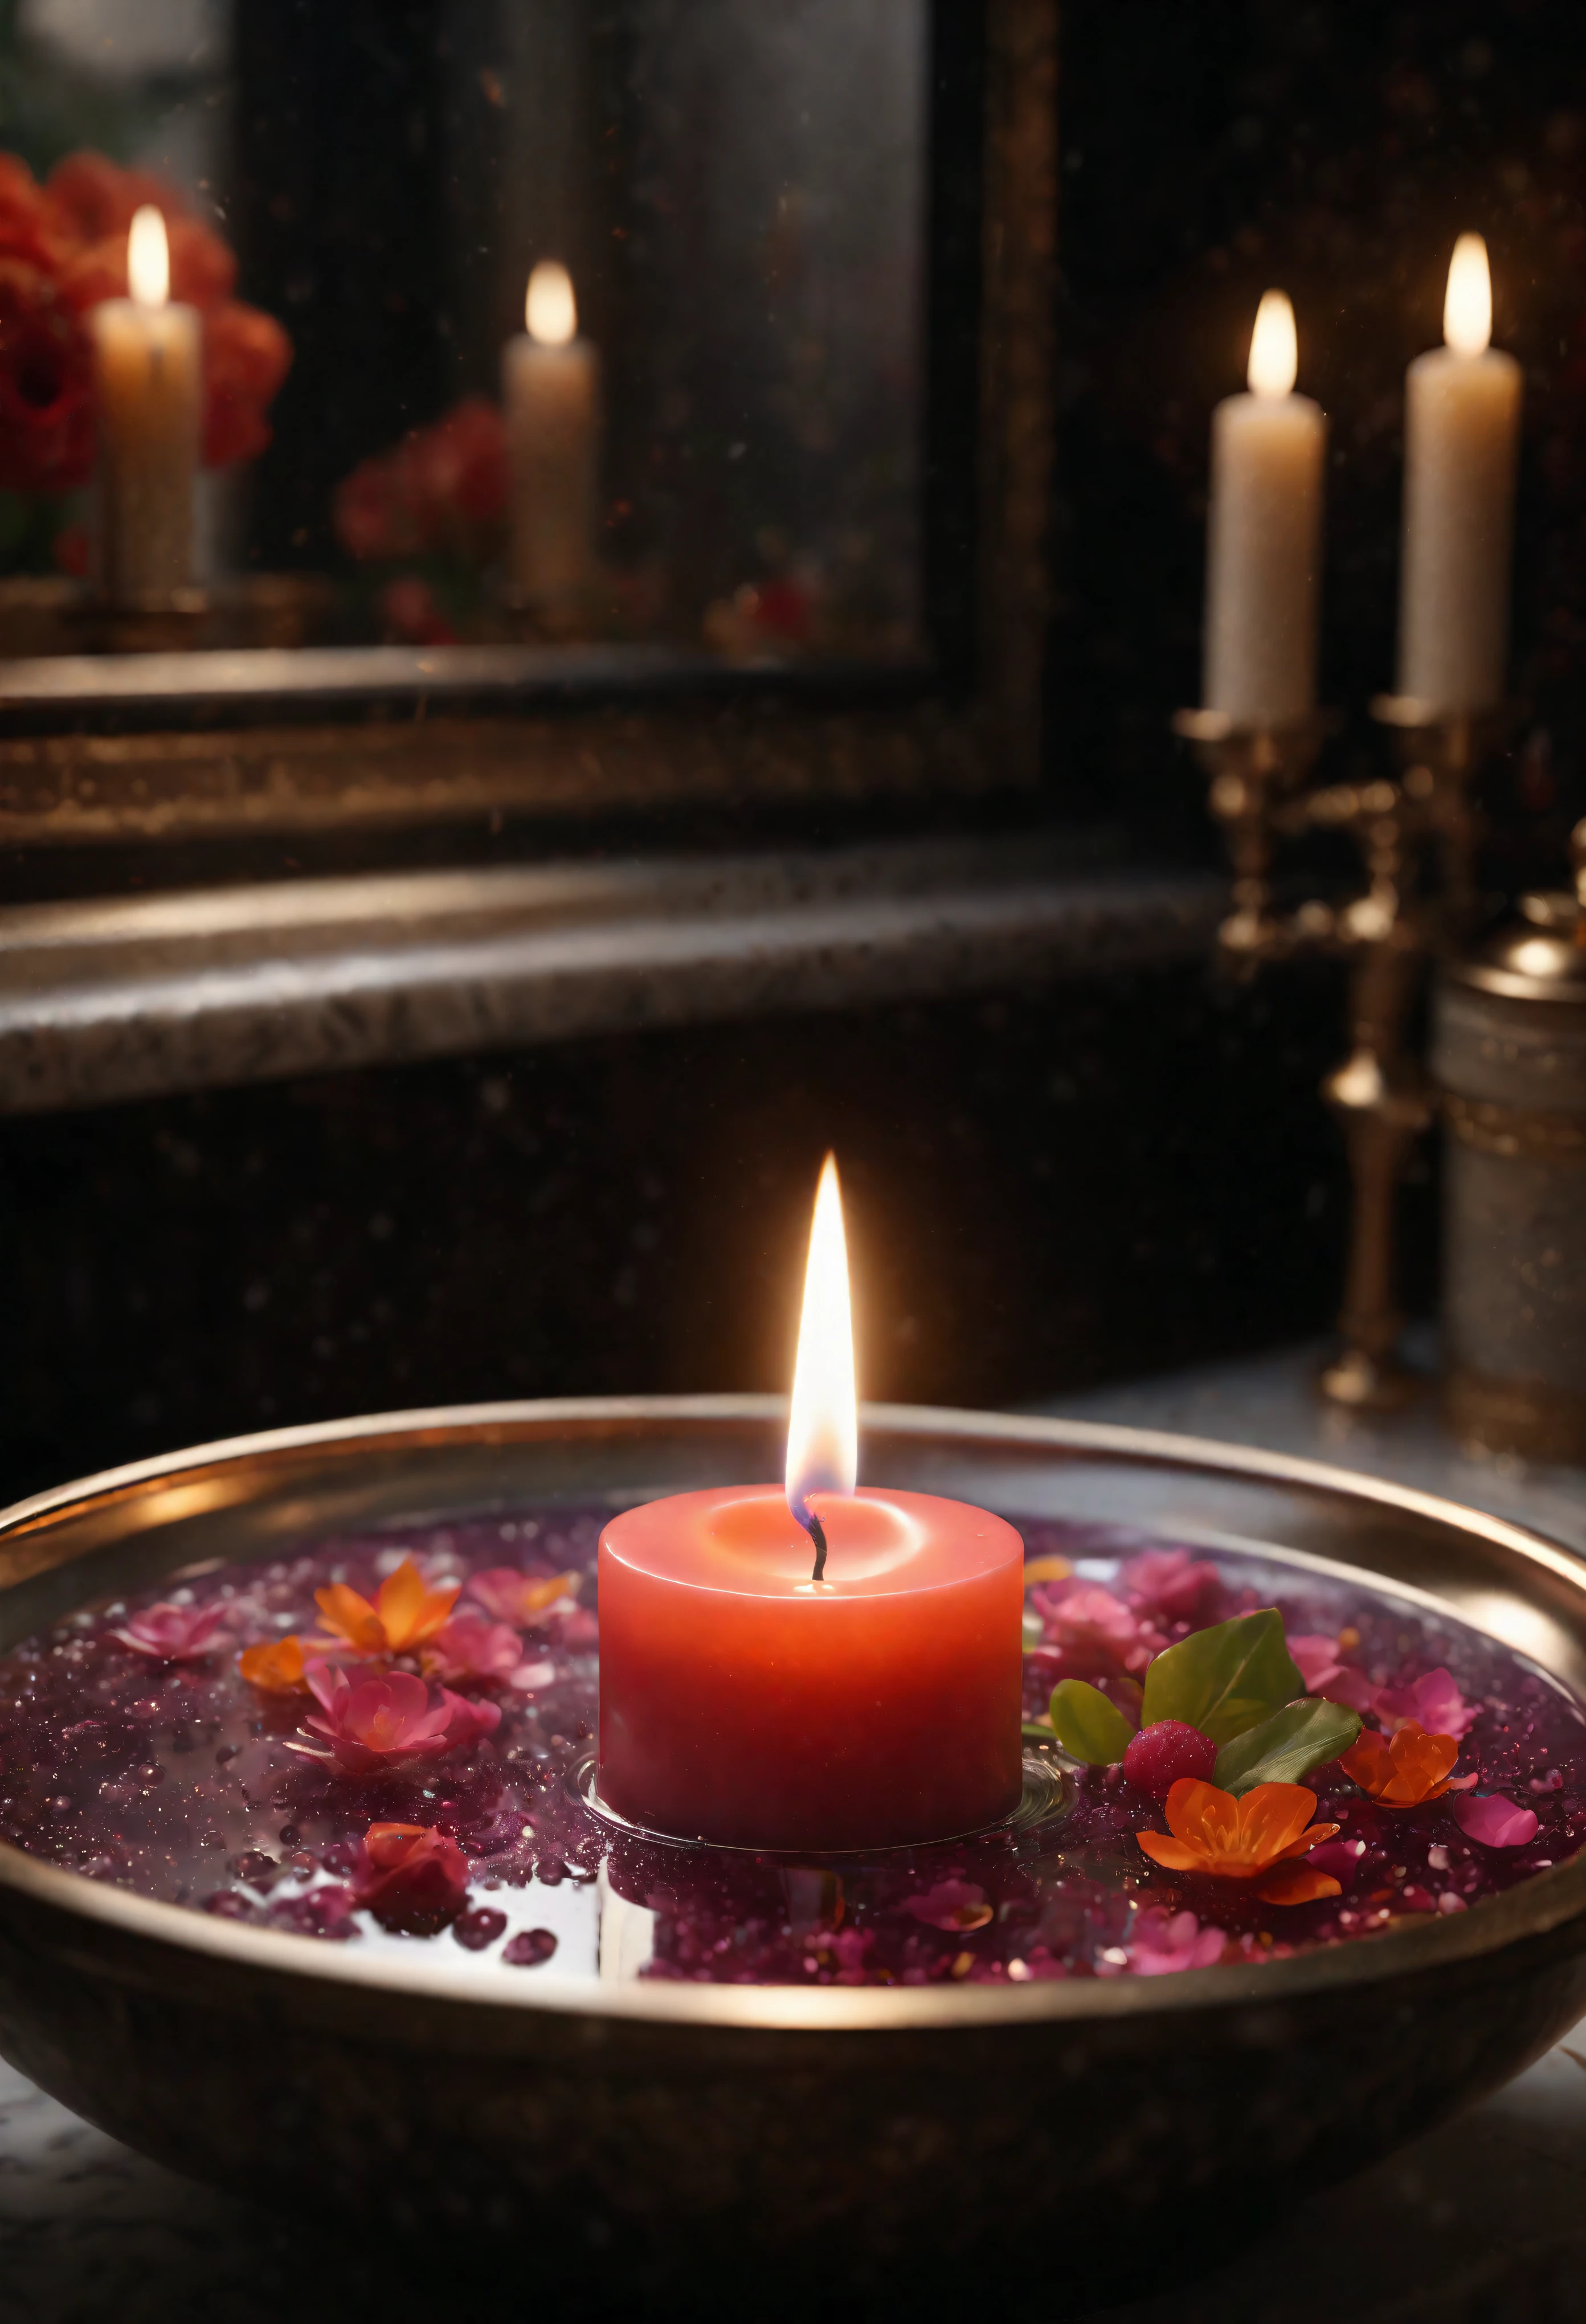 ((Masterpiece in maximum 16K resolution):1.6),((soft_color_photograpy:)1.5), ((Ultra-Detailed):1.4),((Movie-like still images and dynamic angles):1.3). | (Macro shot cinematic photo of a glowing aromatic candle in a fancy bathroom), (aesthethic scented candle), (dim background), (macro lens), (illuminate), (luminous object), (candle glass), (shimmer), (fancy bathroom), (aromatic flower), (visual experience),(Realism), (Realistic),award-winning graphics, dark shot, film grain, extremely detailed, Digital Art, rtx, Unreal Engine, scene concept anti glare effect, All captured with sharp focus. | Rendered in ultra-high definition with UHD and retina quality, this masterpiece ensures anatomical correctness and textured skin with super detail. With a focus on high quality and accuracy, this award-winning portrayal captures every nuance in stunning 16k resolution, immersing viewers in its lifelike depiction. | ((perfect_composition, perfect_design, perfect_layout, perfect_detail, ultra_detailed)), ((enhance_all, fix_everything)), More Detail, Enhance.

